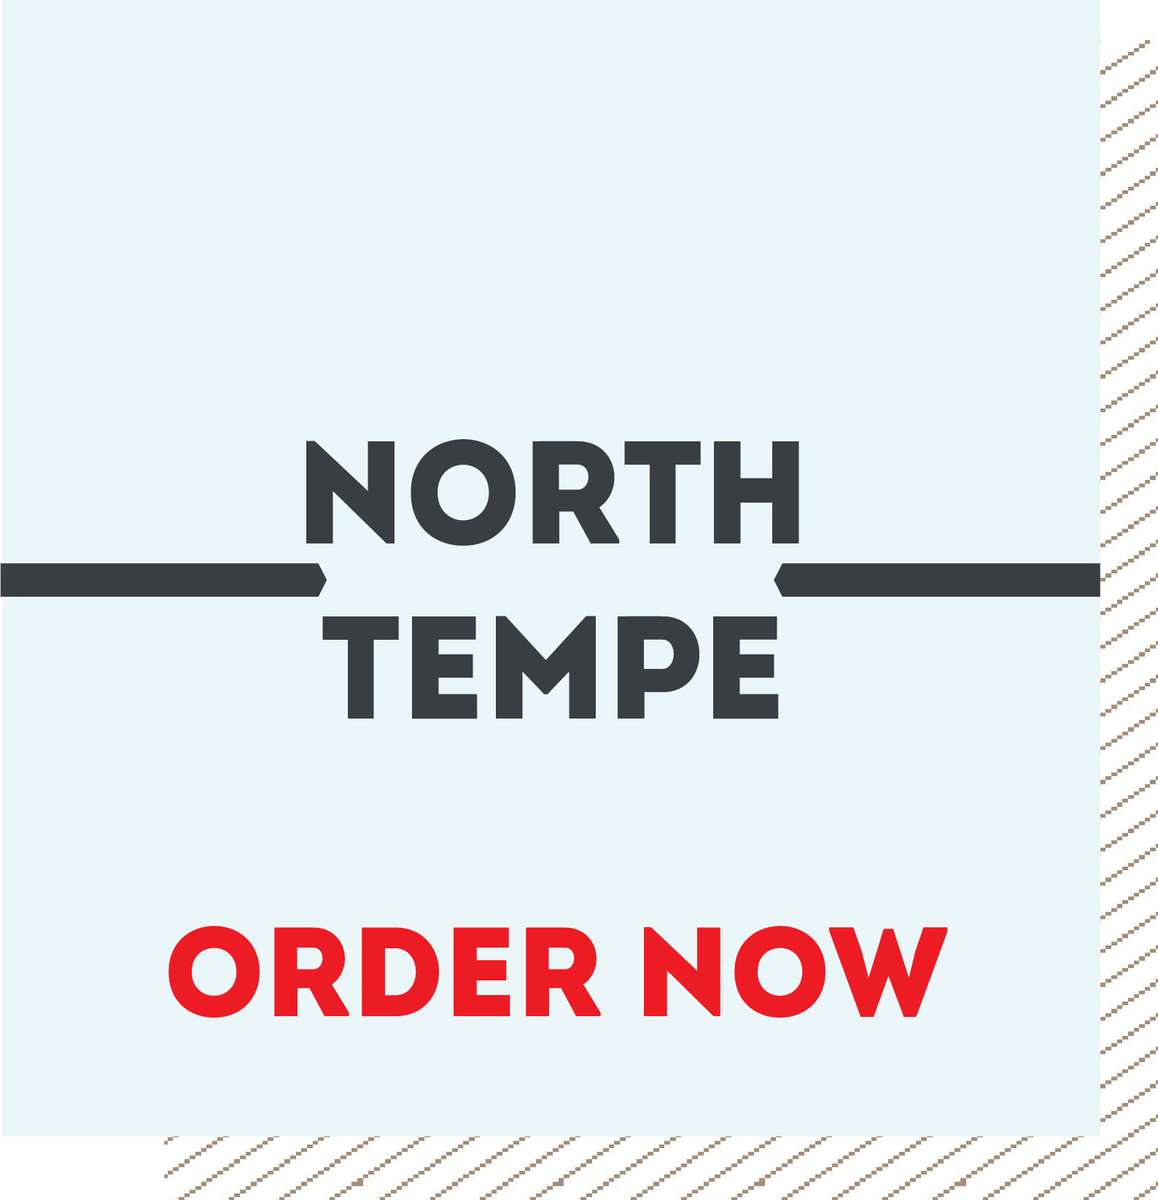 North Tempe. Order now.